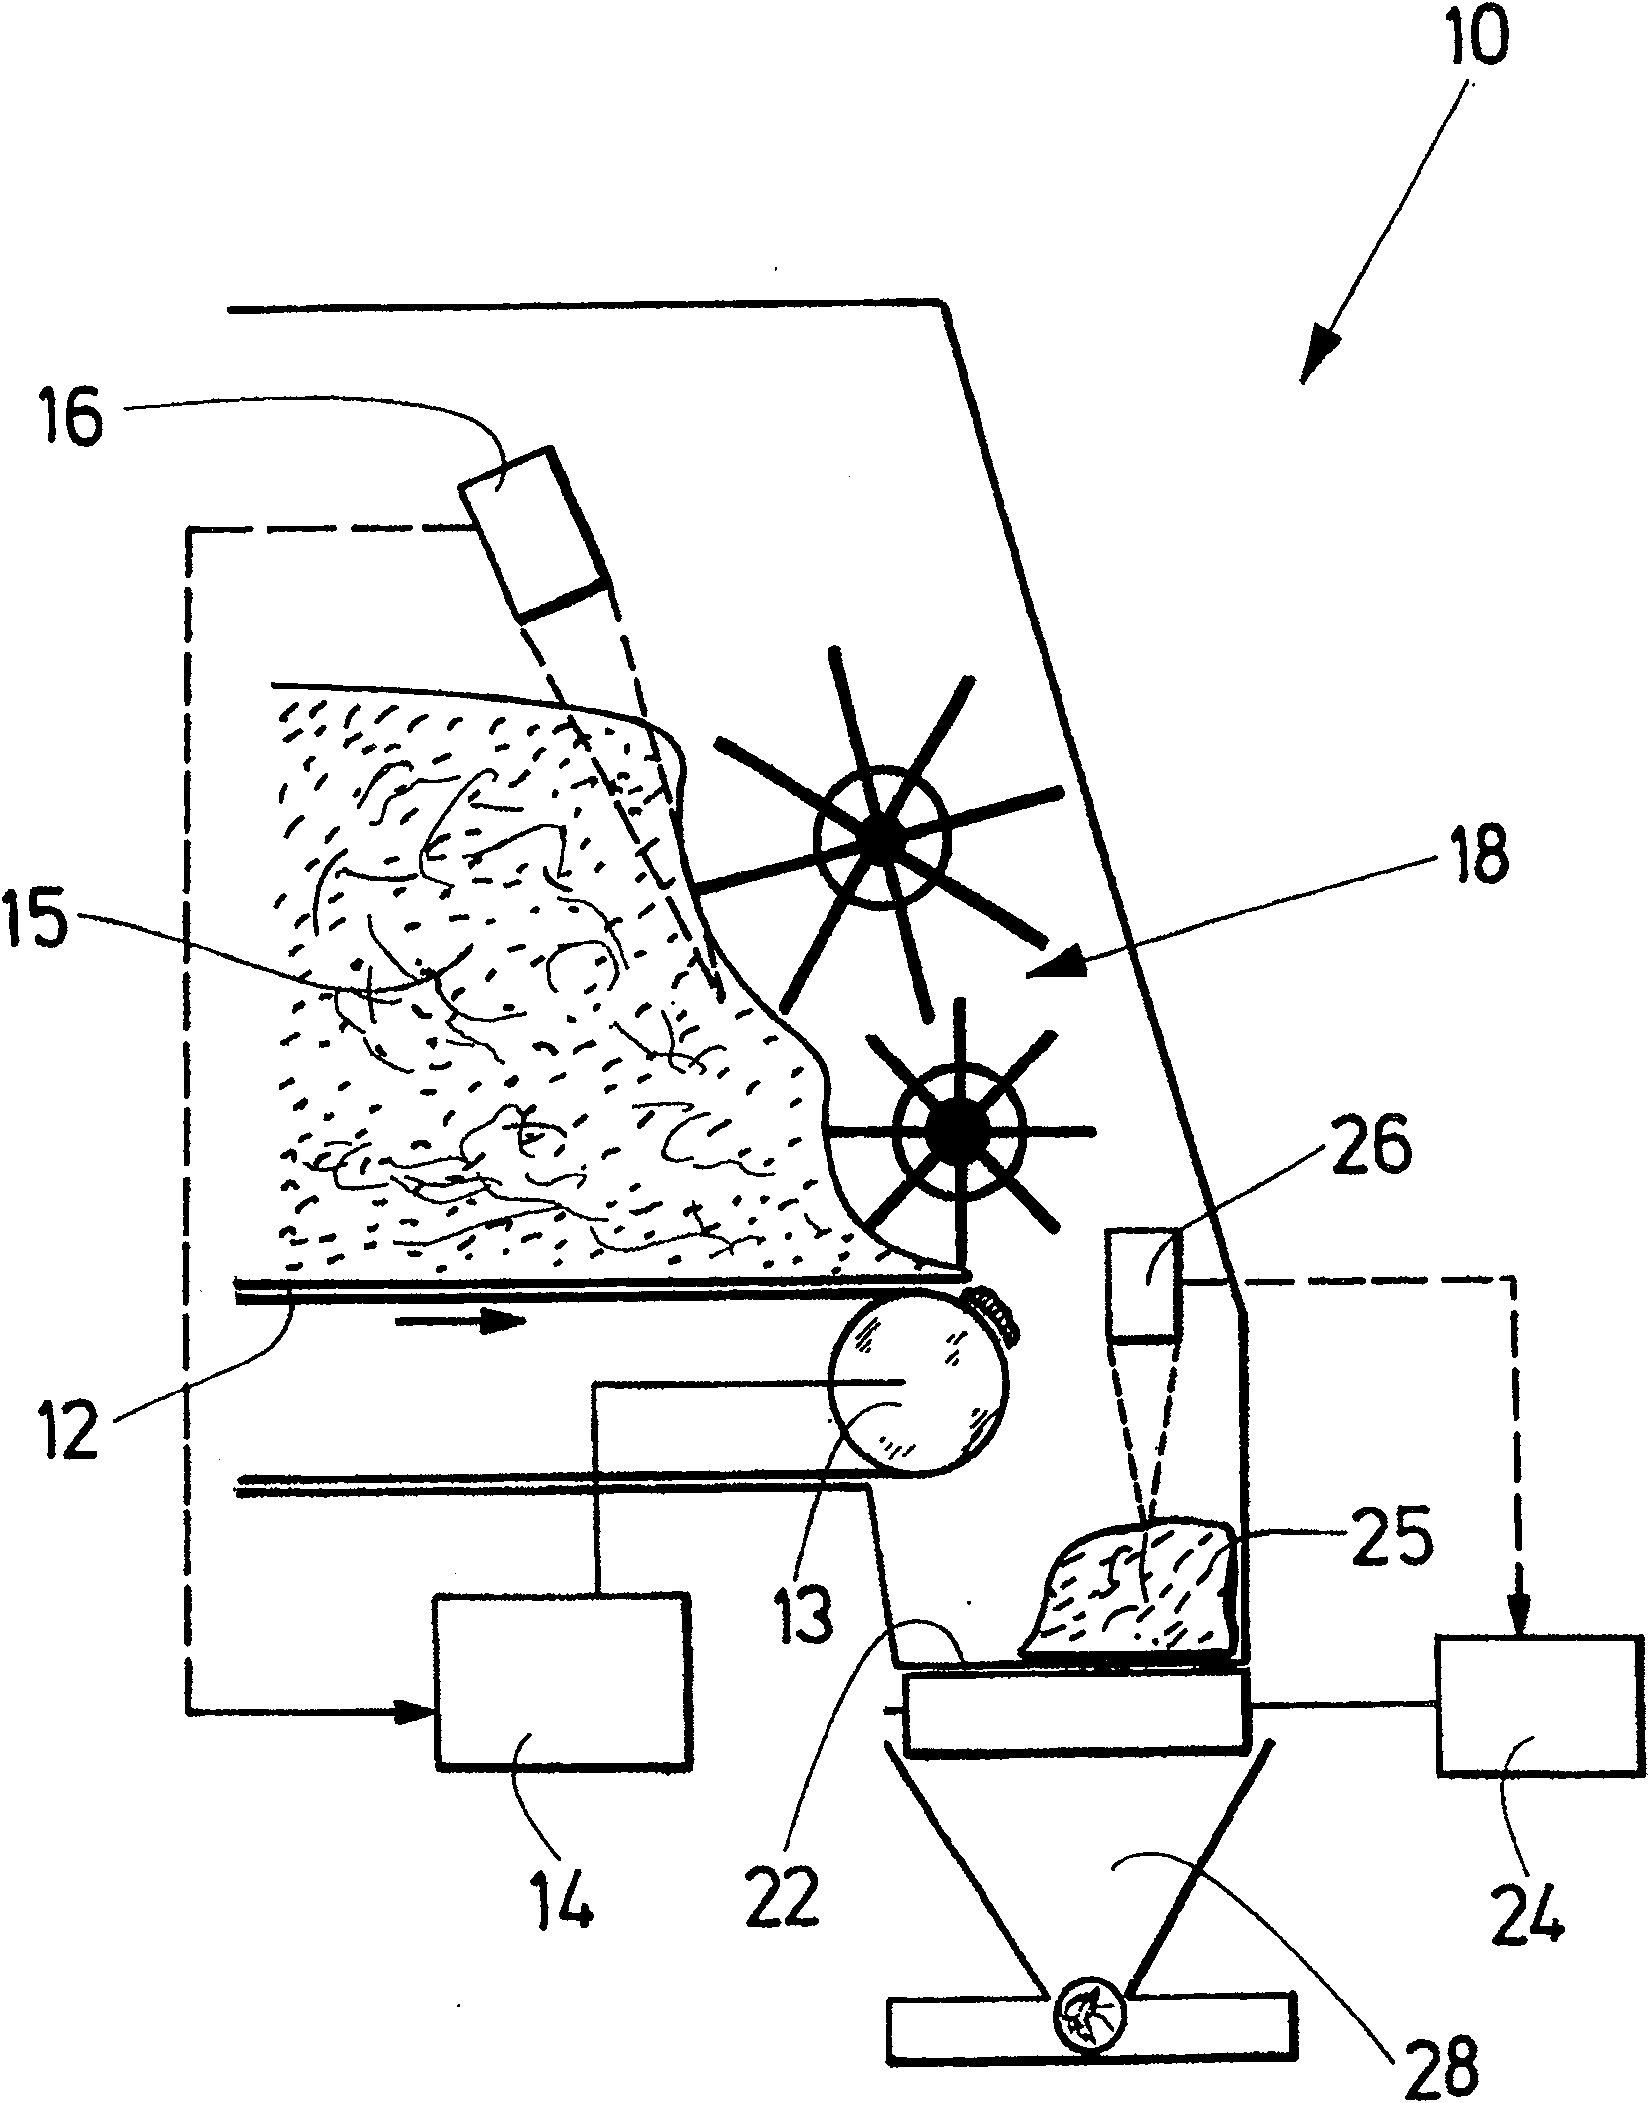 Method and device for unloading tobacco material from an intermediate reservoir